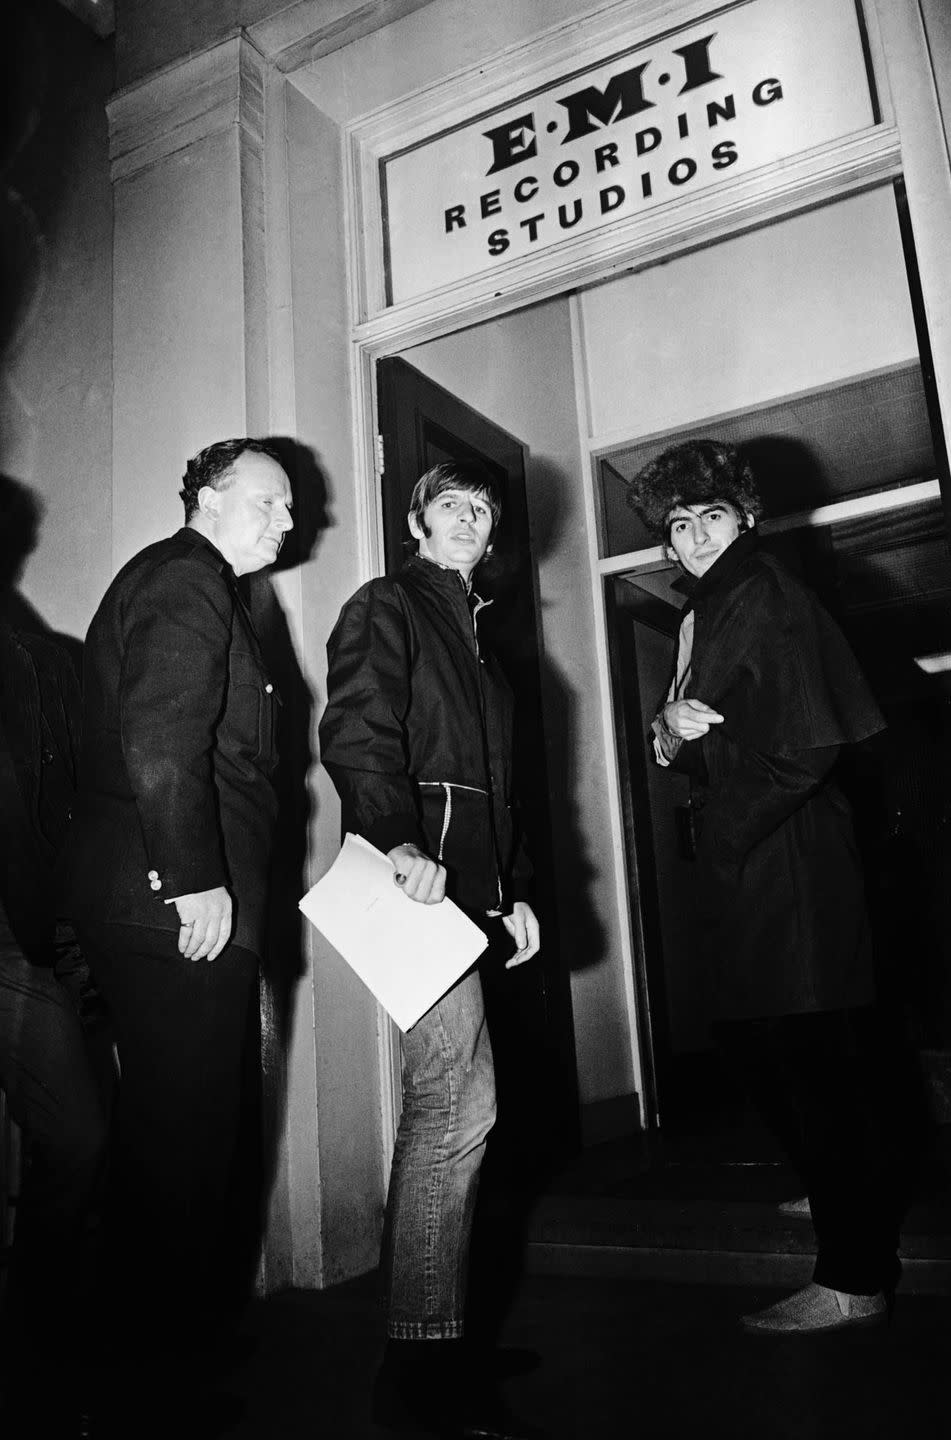 25 Photos of The Beatles Behind the Scenes at Abbey Road